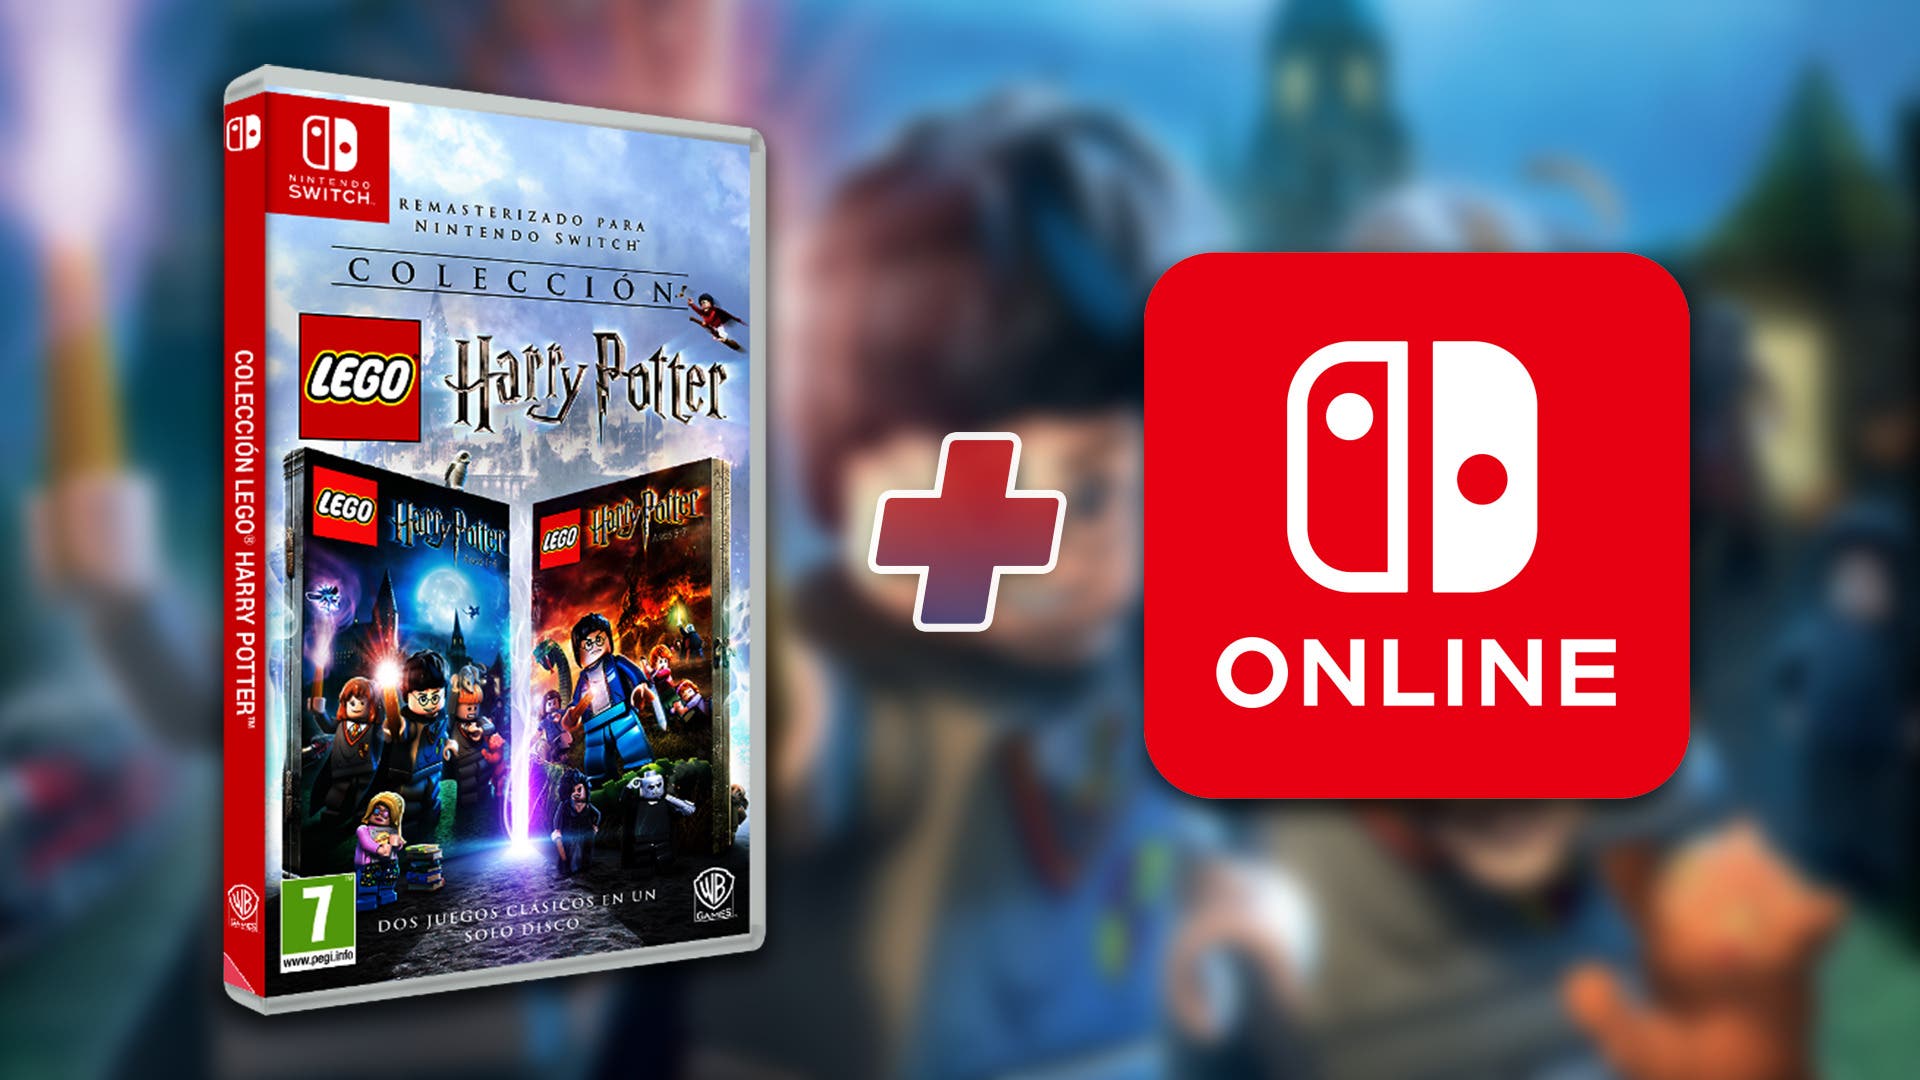 Get this bundle of Lego Harry Potter and 1 year of Nintendo Switch Online for a ridiculous price